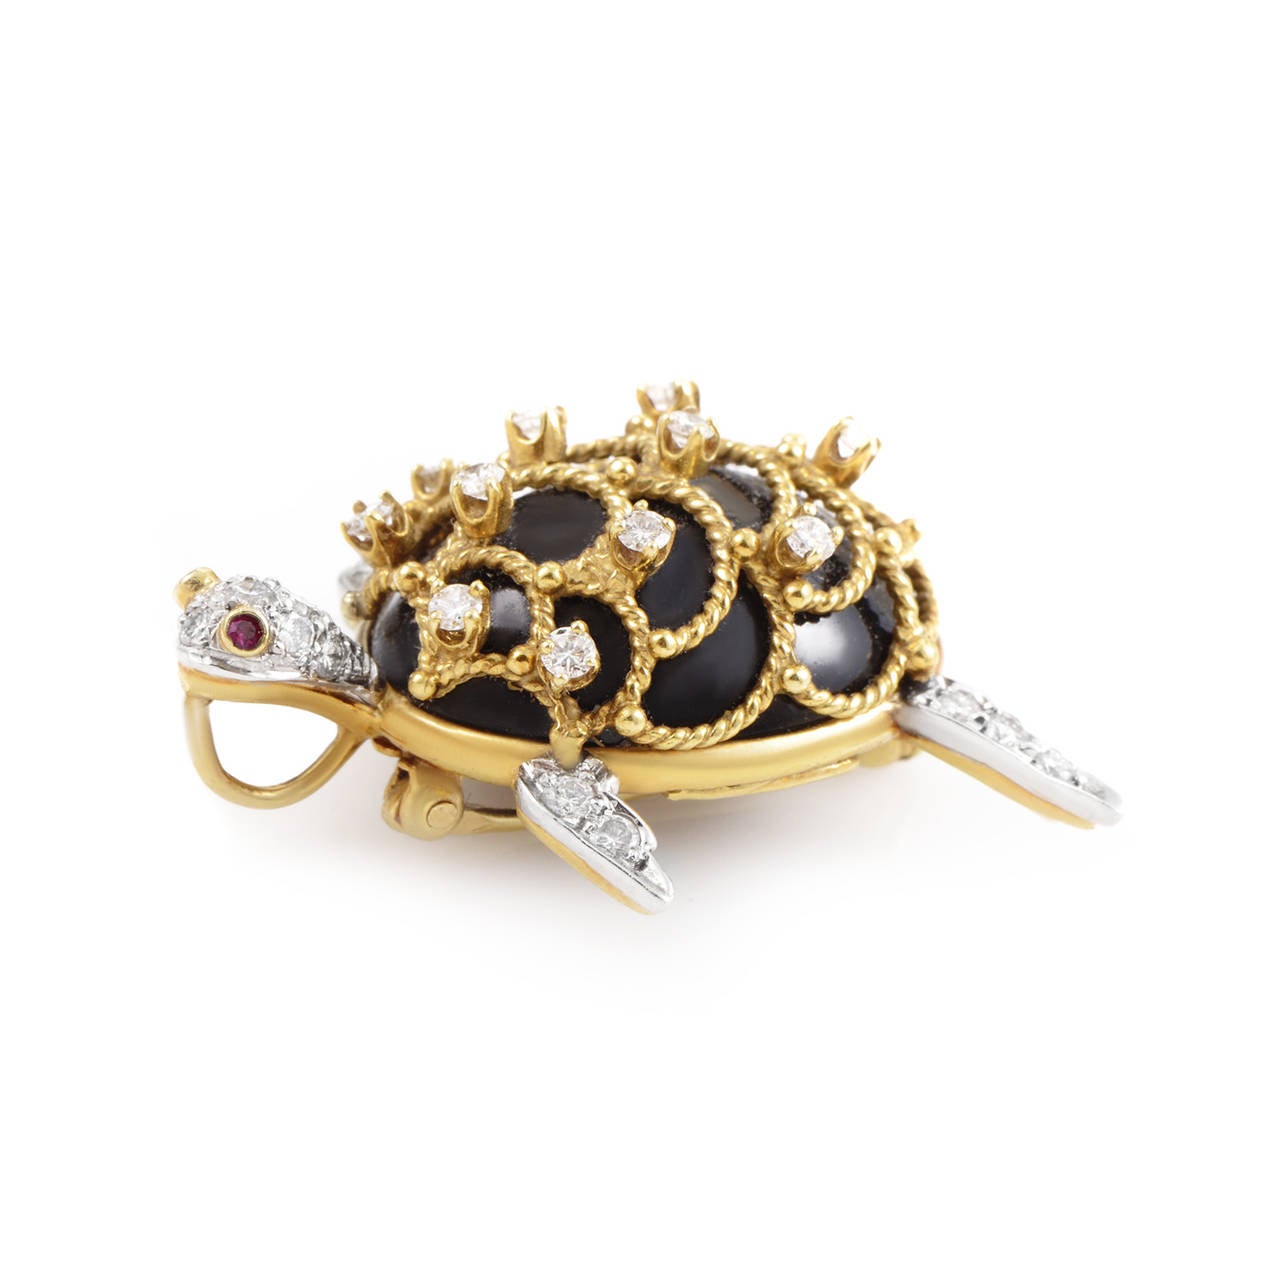 This unique design from Hammerman Brothers is perfect for a lady who likes multi-functional accessories. This brooch/pendant depicts a turtle and is made of a combination of 18K yellow gold and platinum. The turtle's shell is accented with enamel